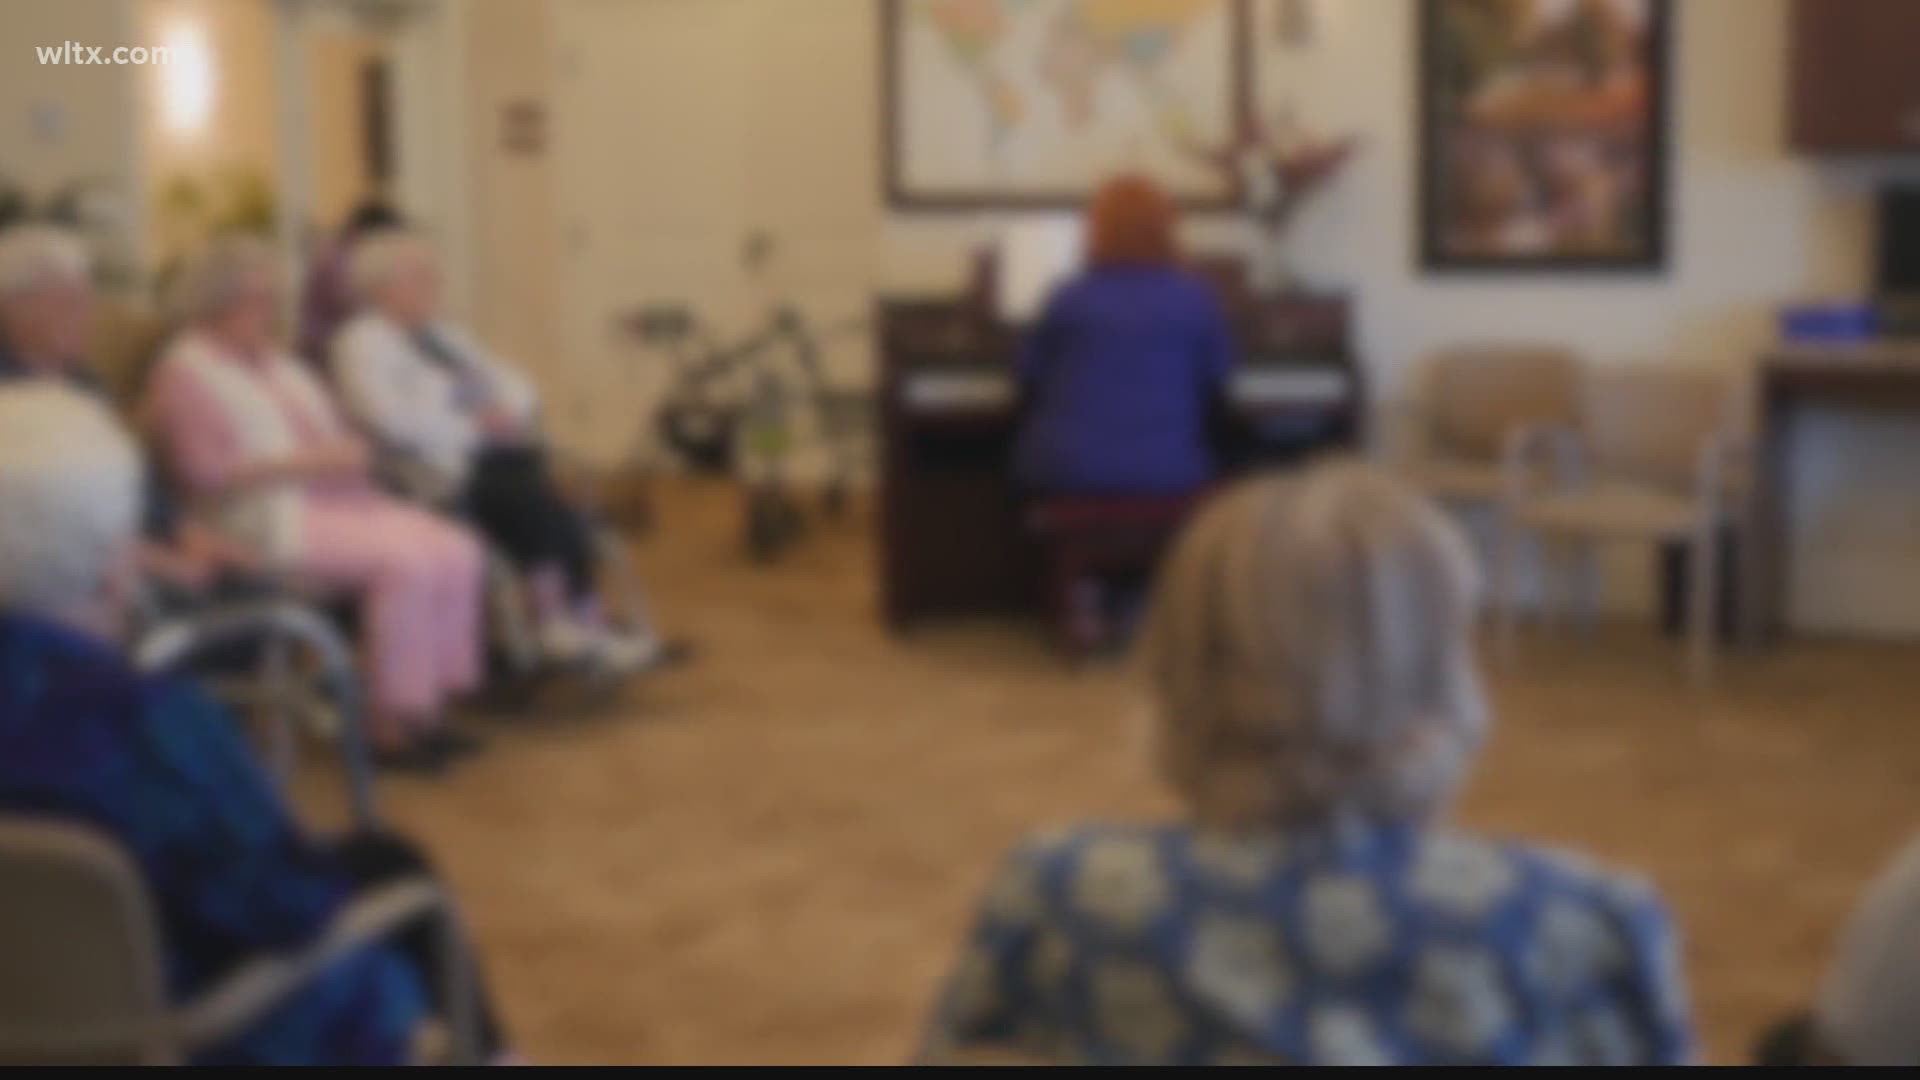 A Lexington nursing home has 26 confirmed COVID-19 deaths. That's the highest in the Midlands and the second highest in the state.